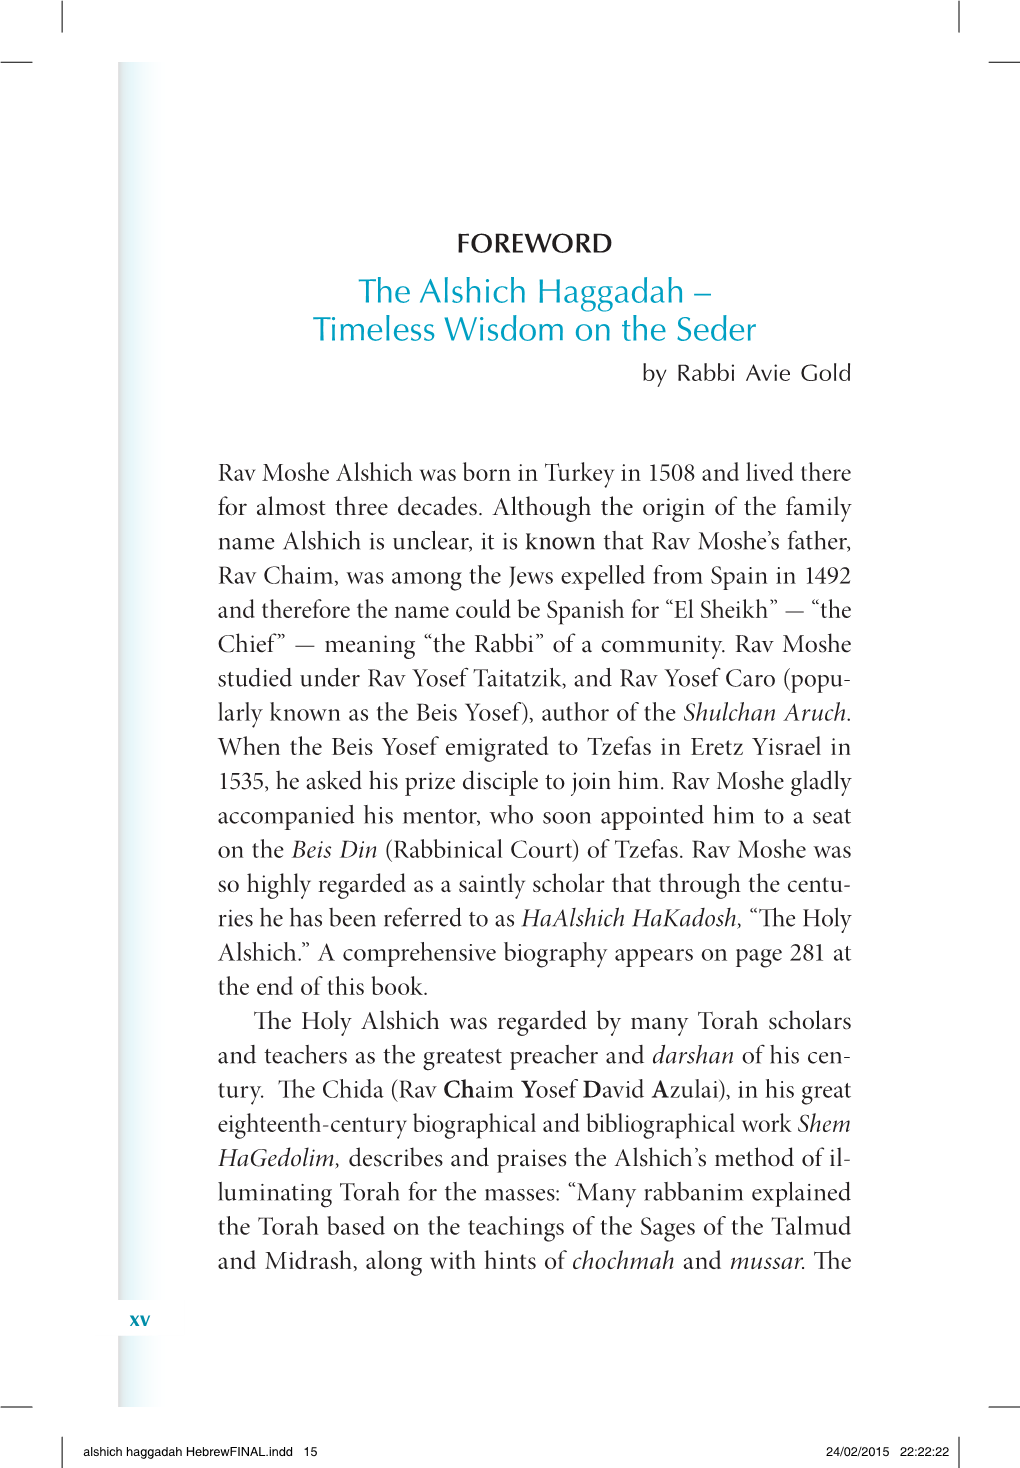 The Alshich Haggadah – Timeless Wisdom on the Seder by Rabbi Avie Gold